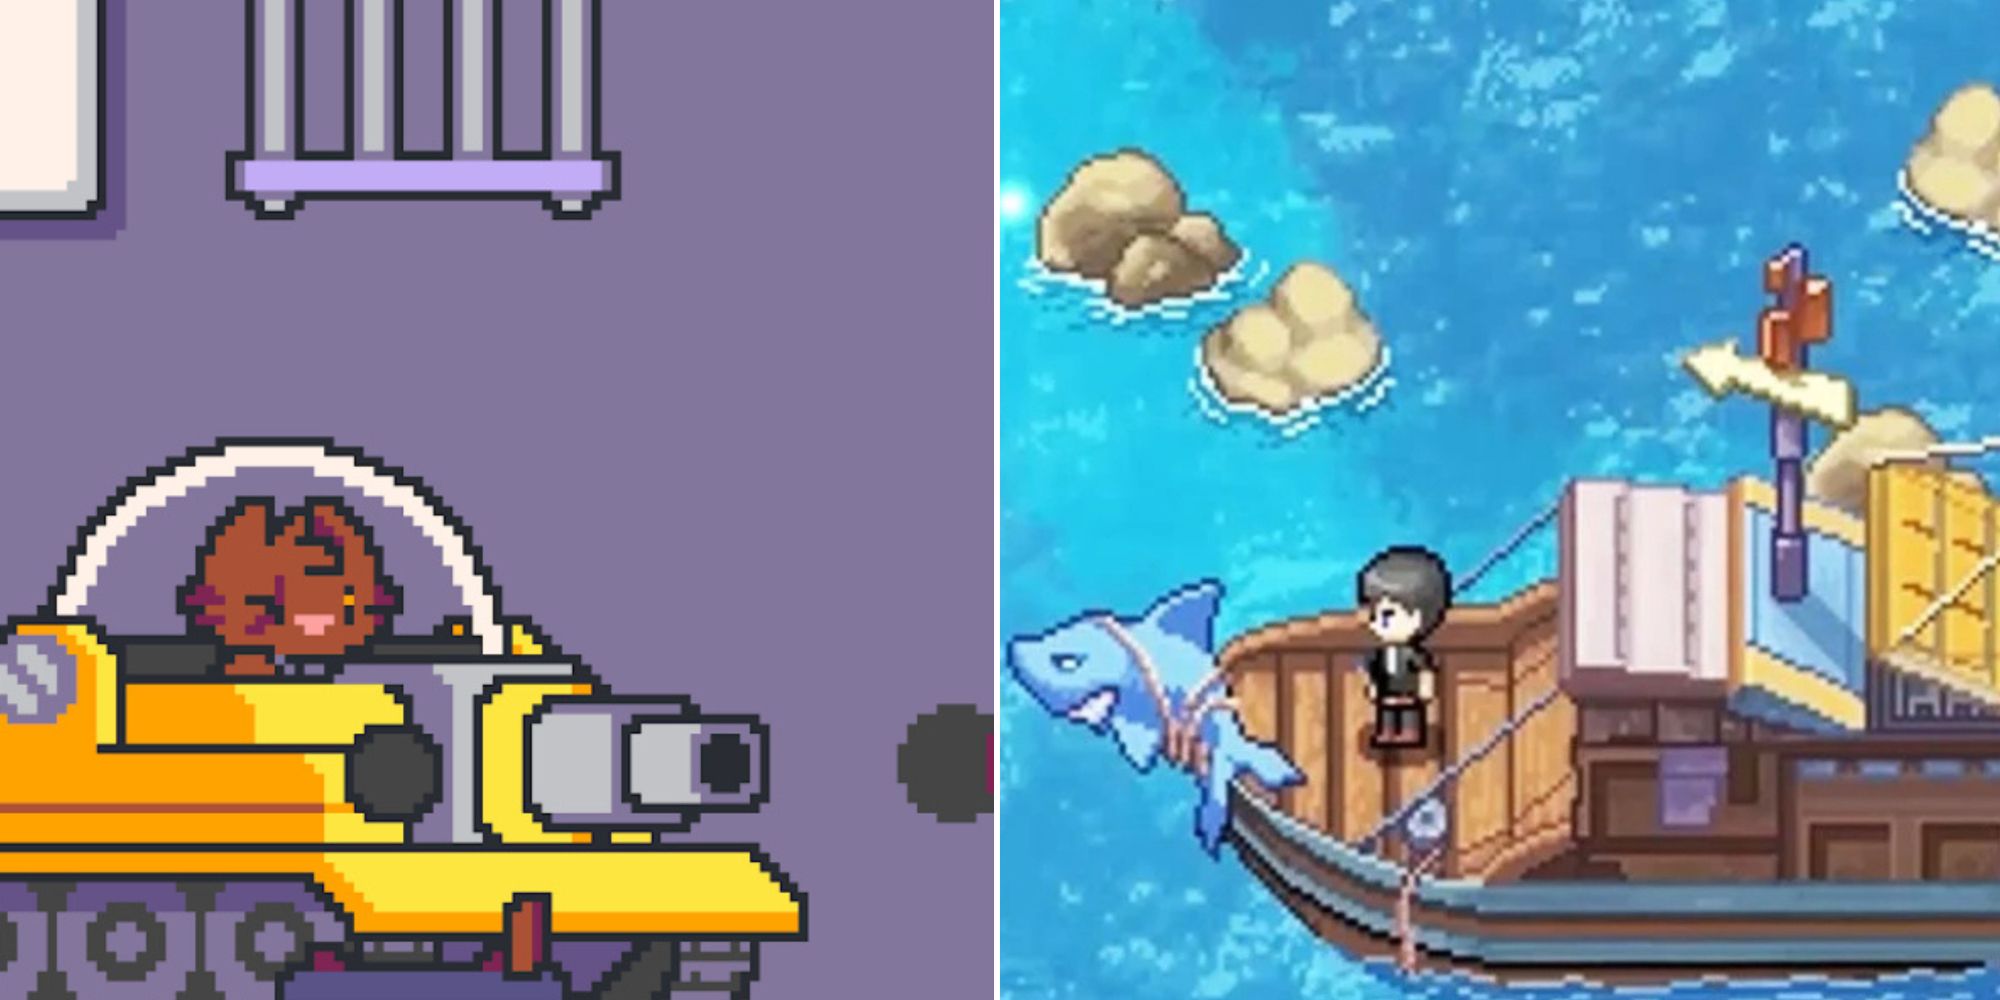 Cat from Super Cat Tales 2 in a tank and character from Harvest Town in a ship.